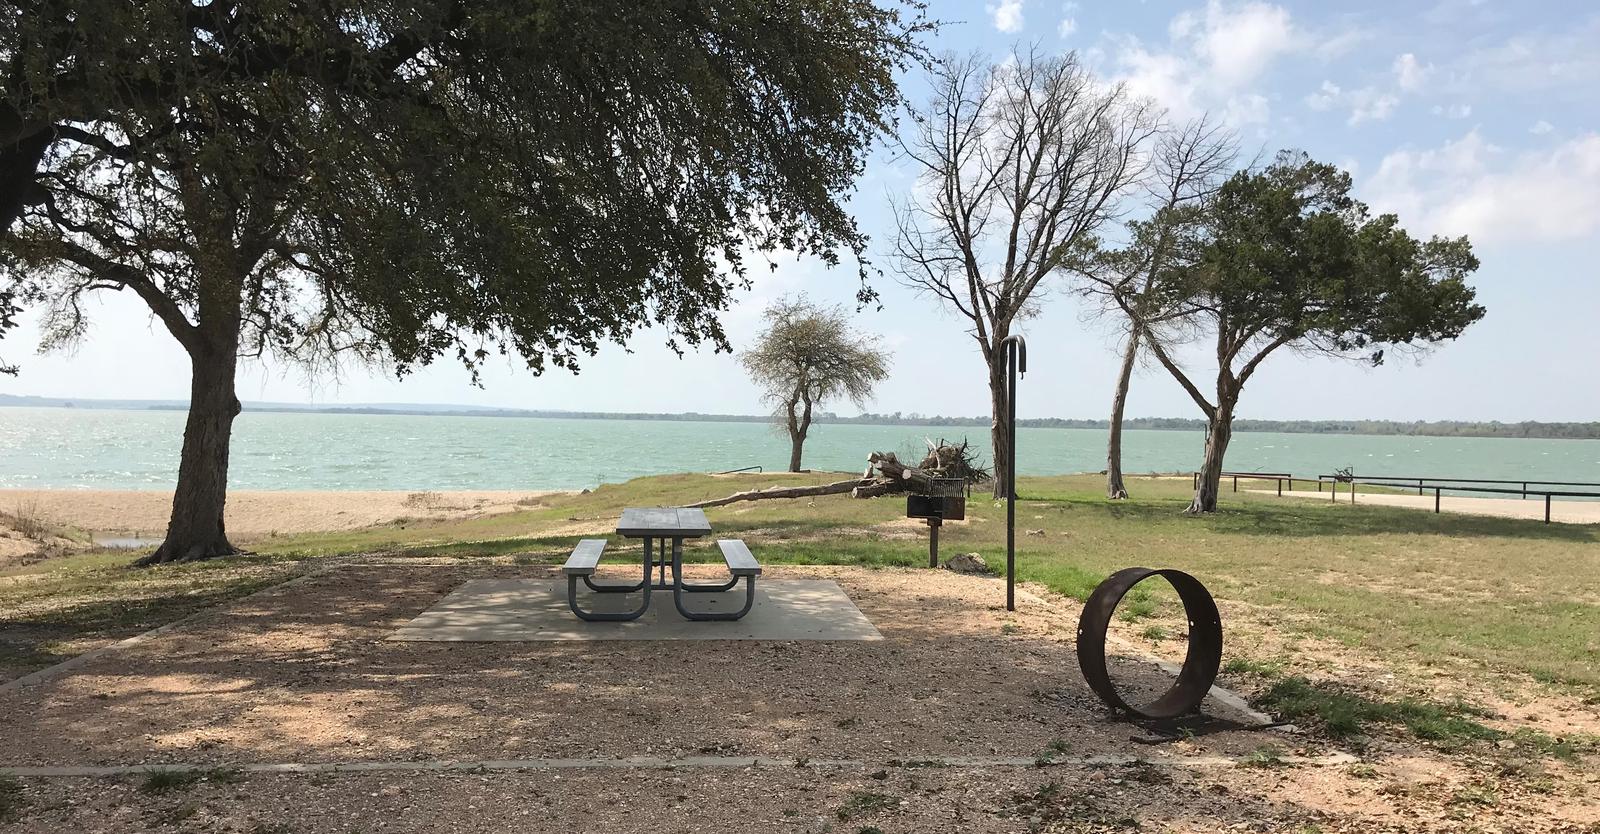 Tent site with picnic table, grill, and fire ring.  Site is located very close to shoreline of Waco Lake 